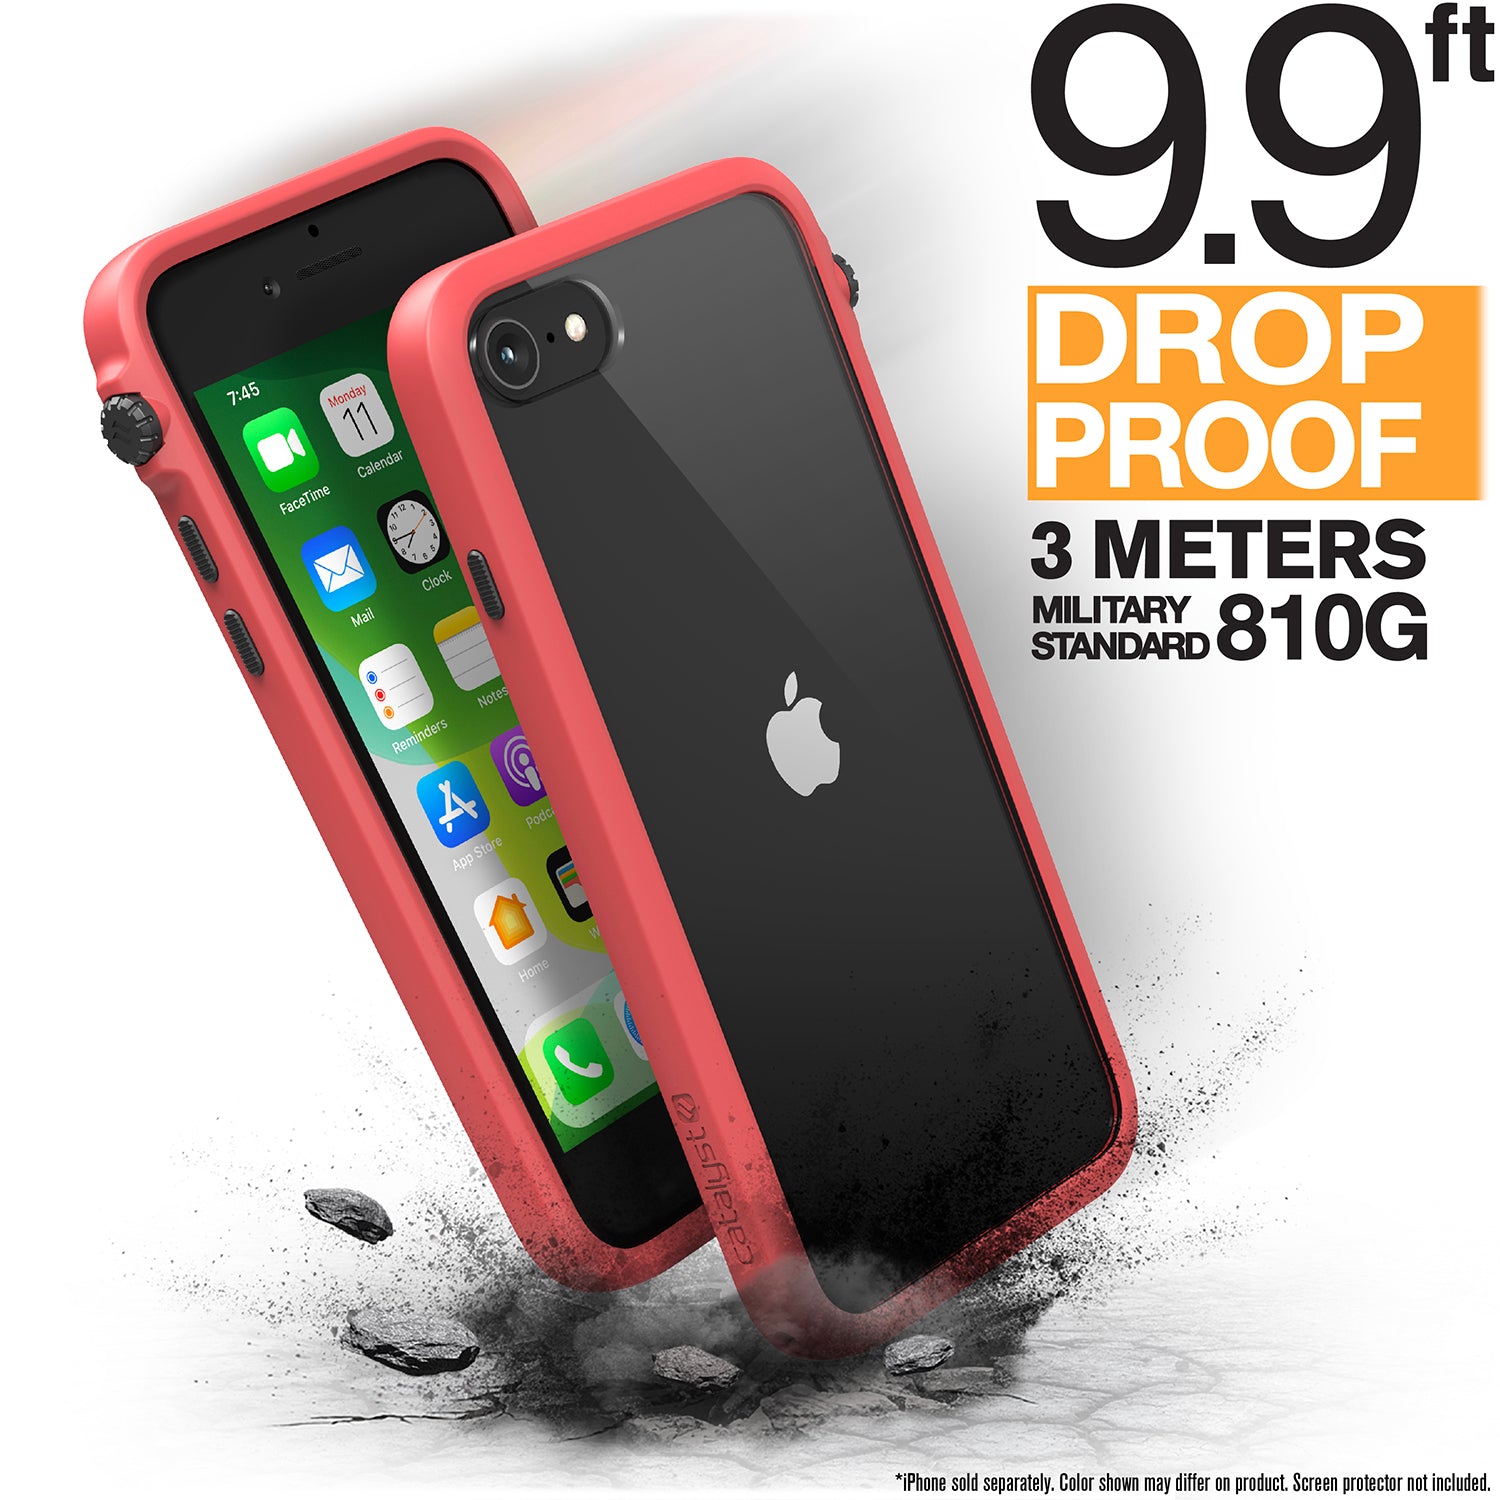 Catalyst iphone 8/7 impact protection case showing how drop proof the case is in a coral colorway text reads 9.9 ft drop proof 3 meters military standard 810g